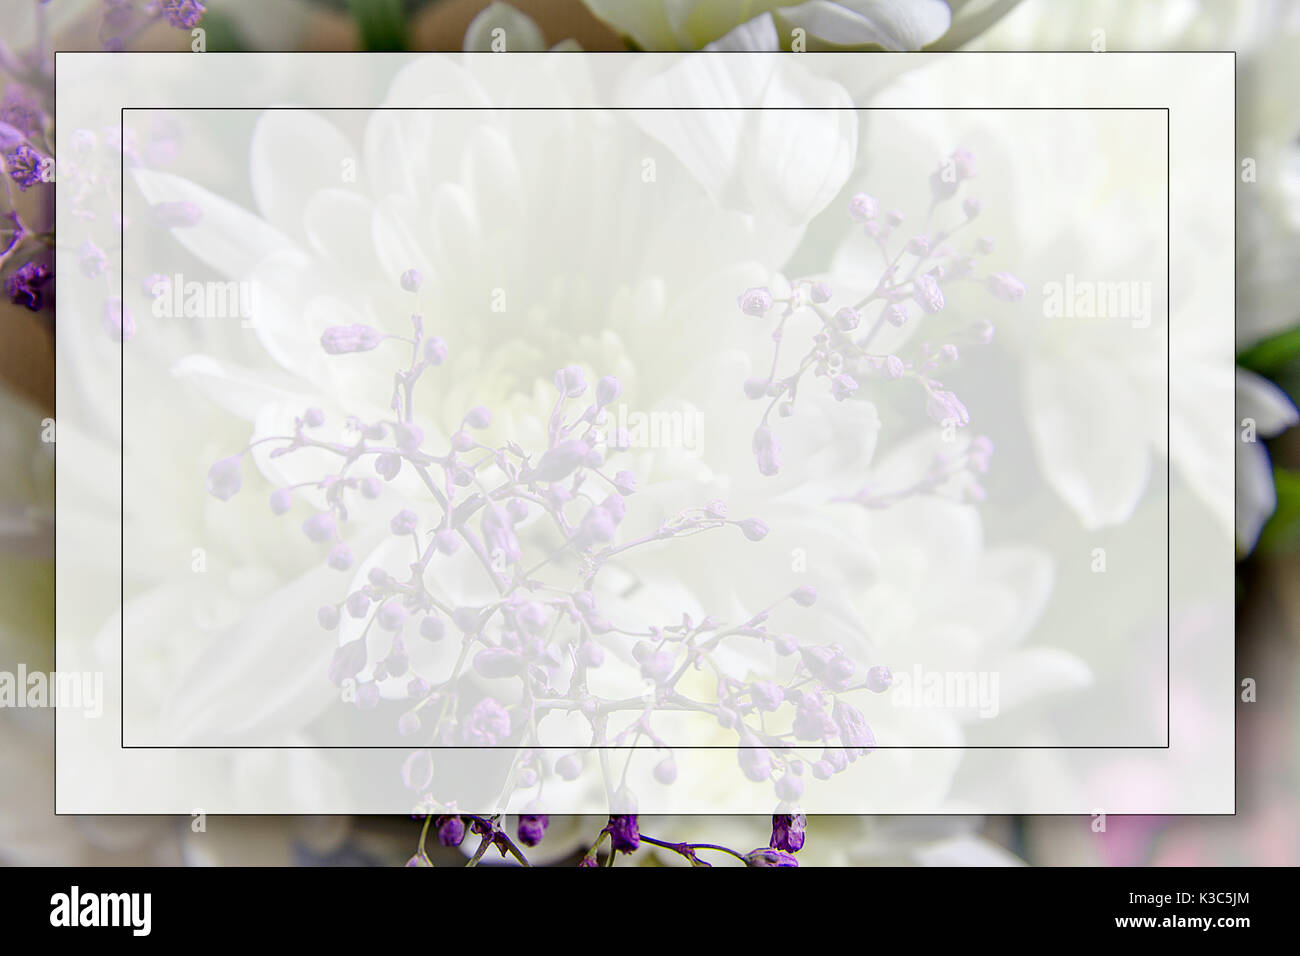 'Put Your Own Text Box' over a Lilac Flower Background.  The image was taken on the 15 February 2015 Stock Photo